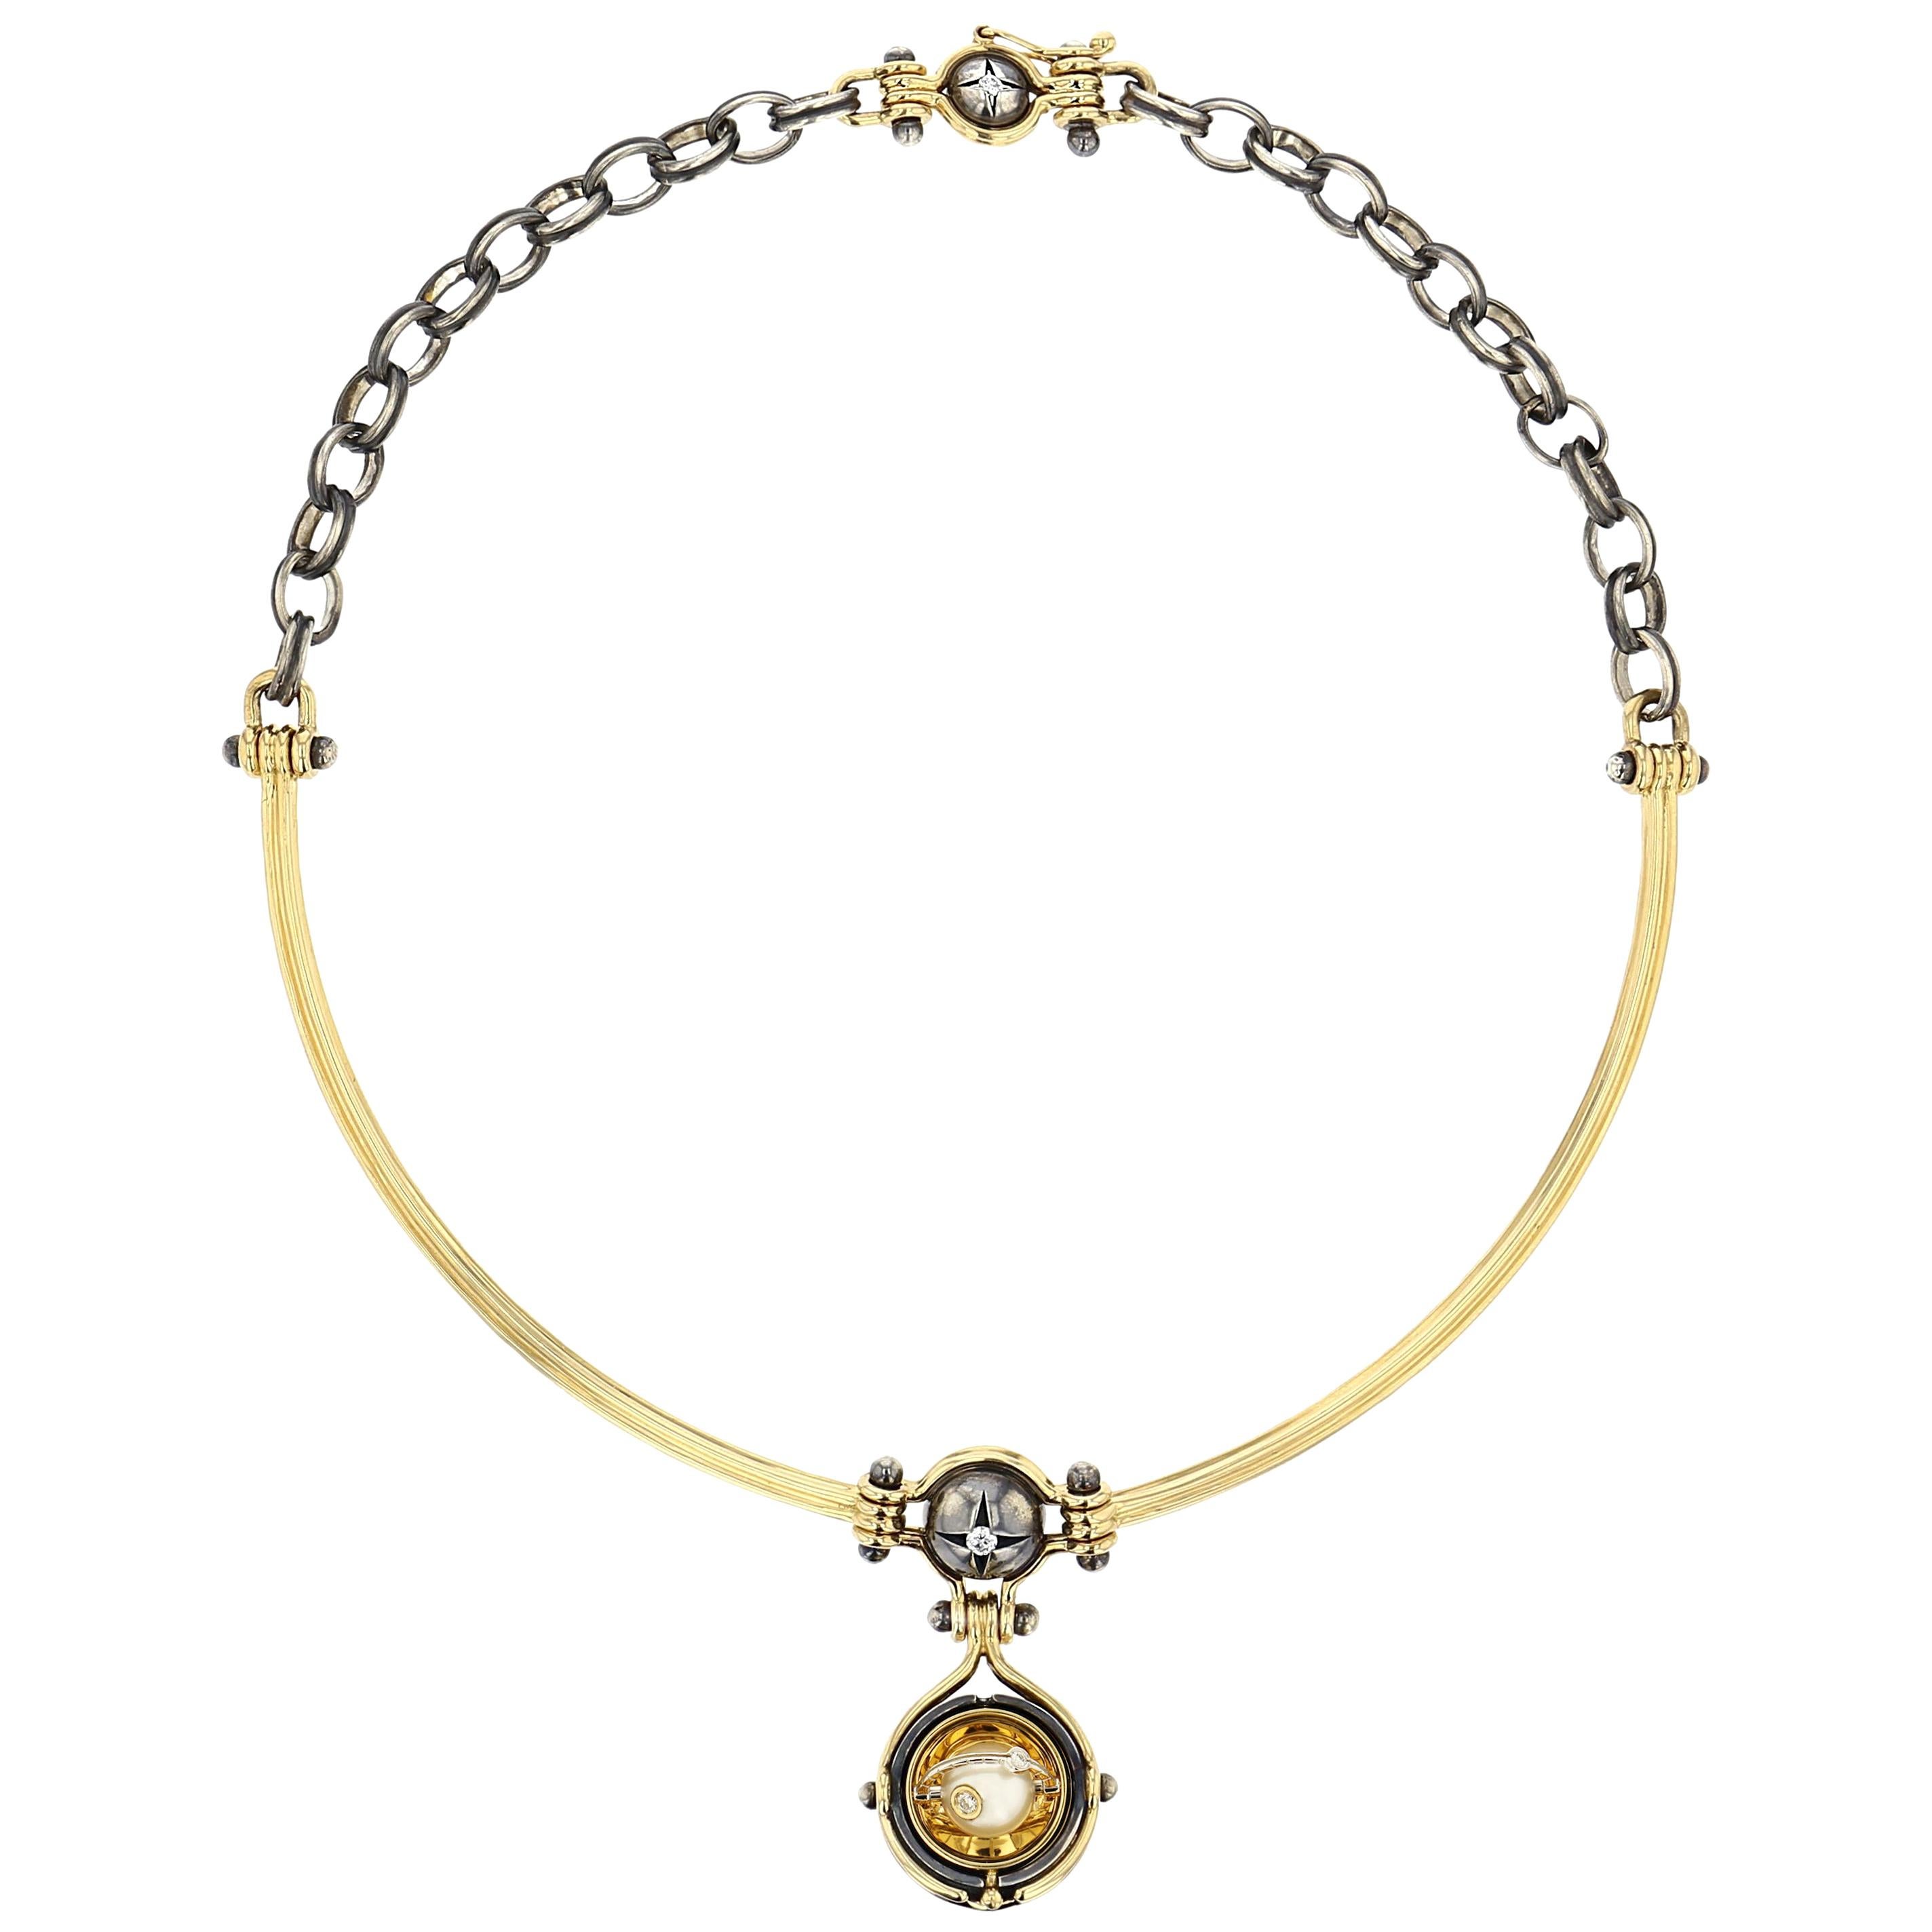 Jonc Akoya Pearls Necklace in 18k yellow gold by Elie Top